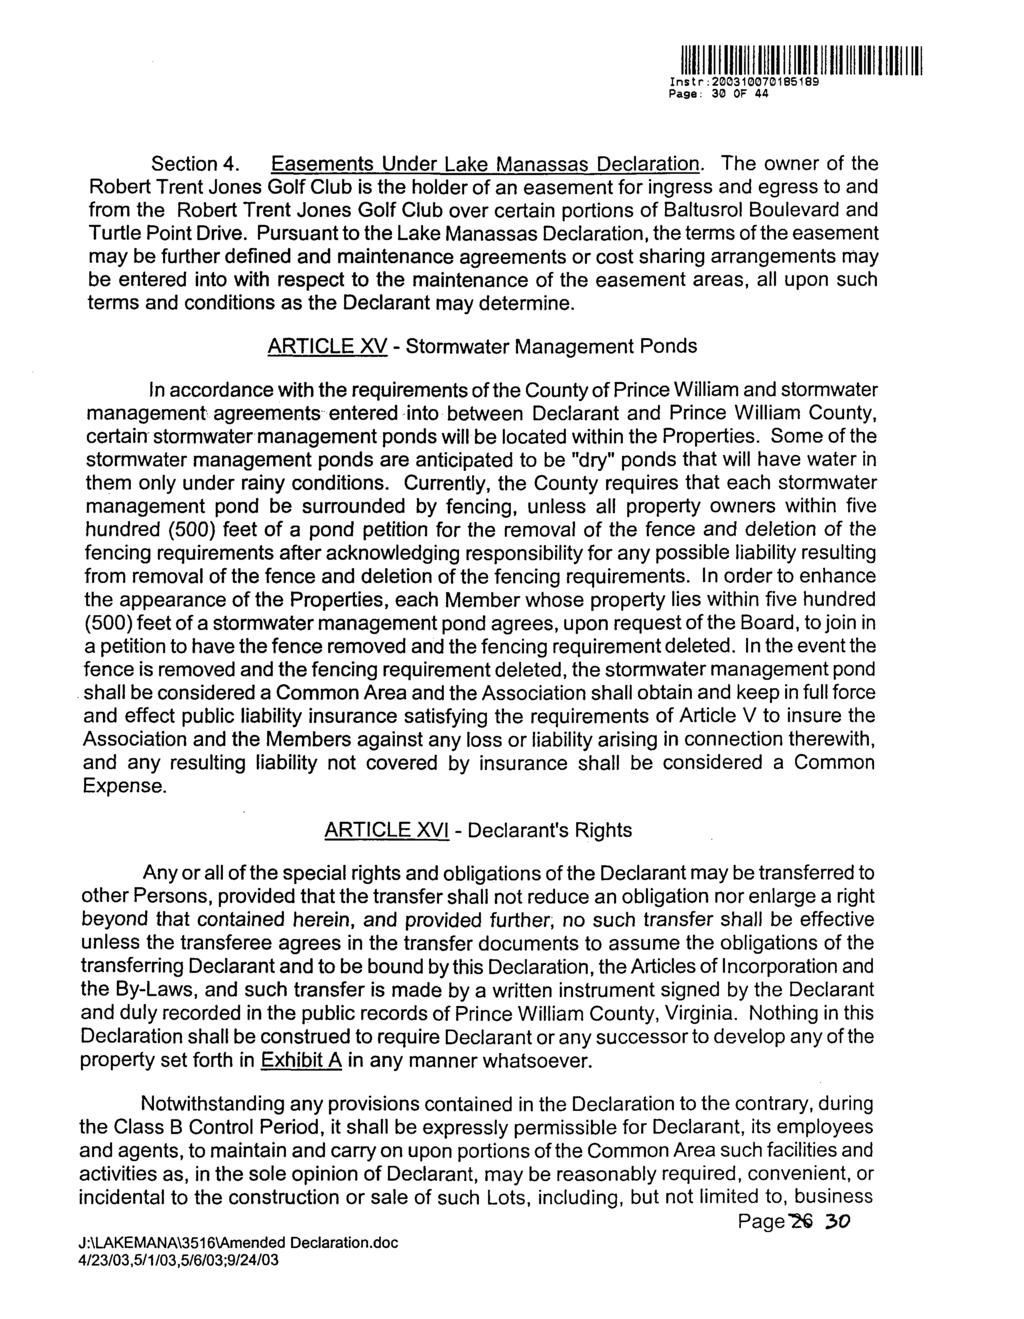 Page: 30 OF 44 Section 4. Easements Under Lake Manassas Declaration.